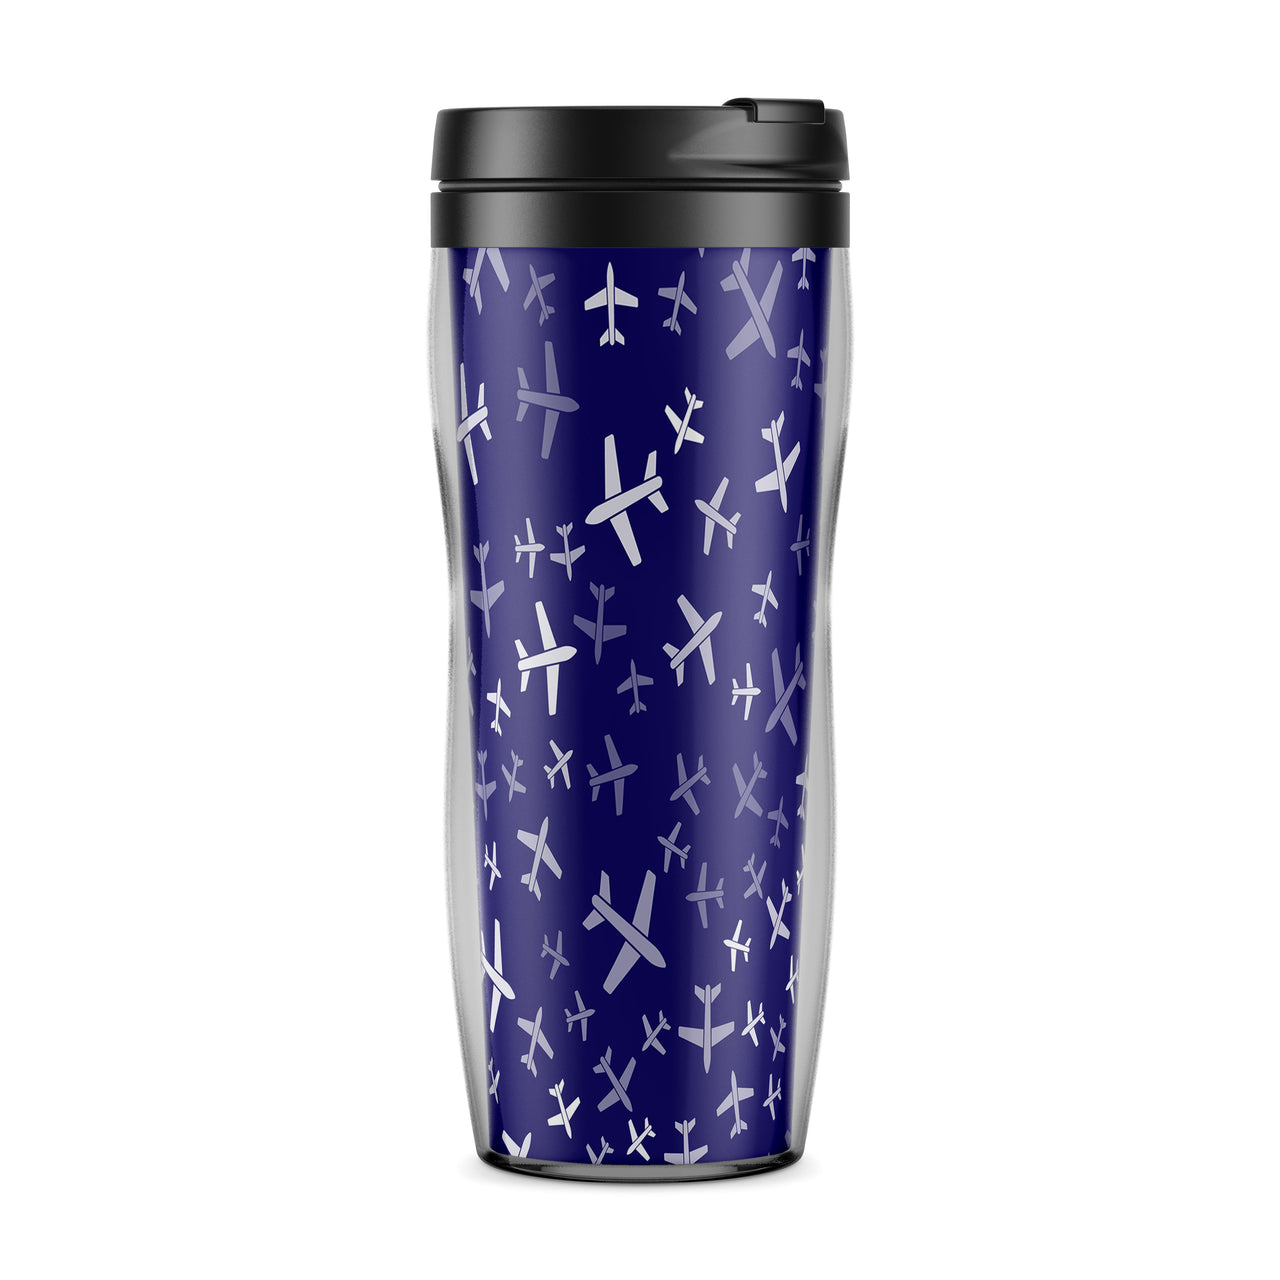 Different Sizes Seamless Airplanes Designed Travel Mugs